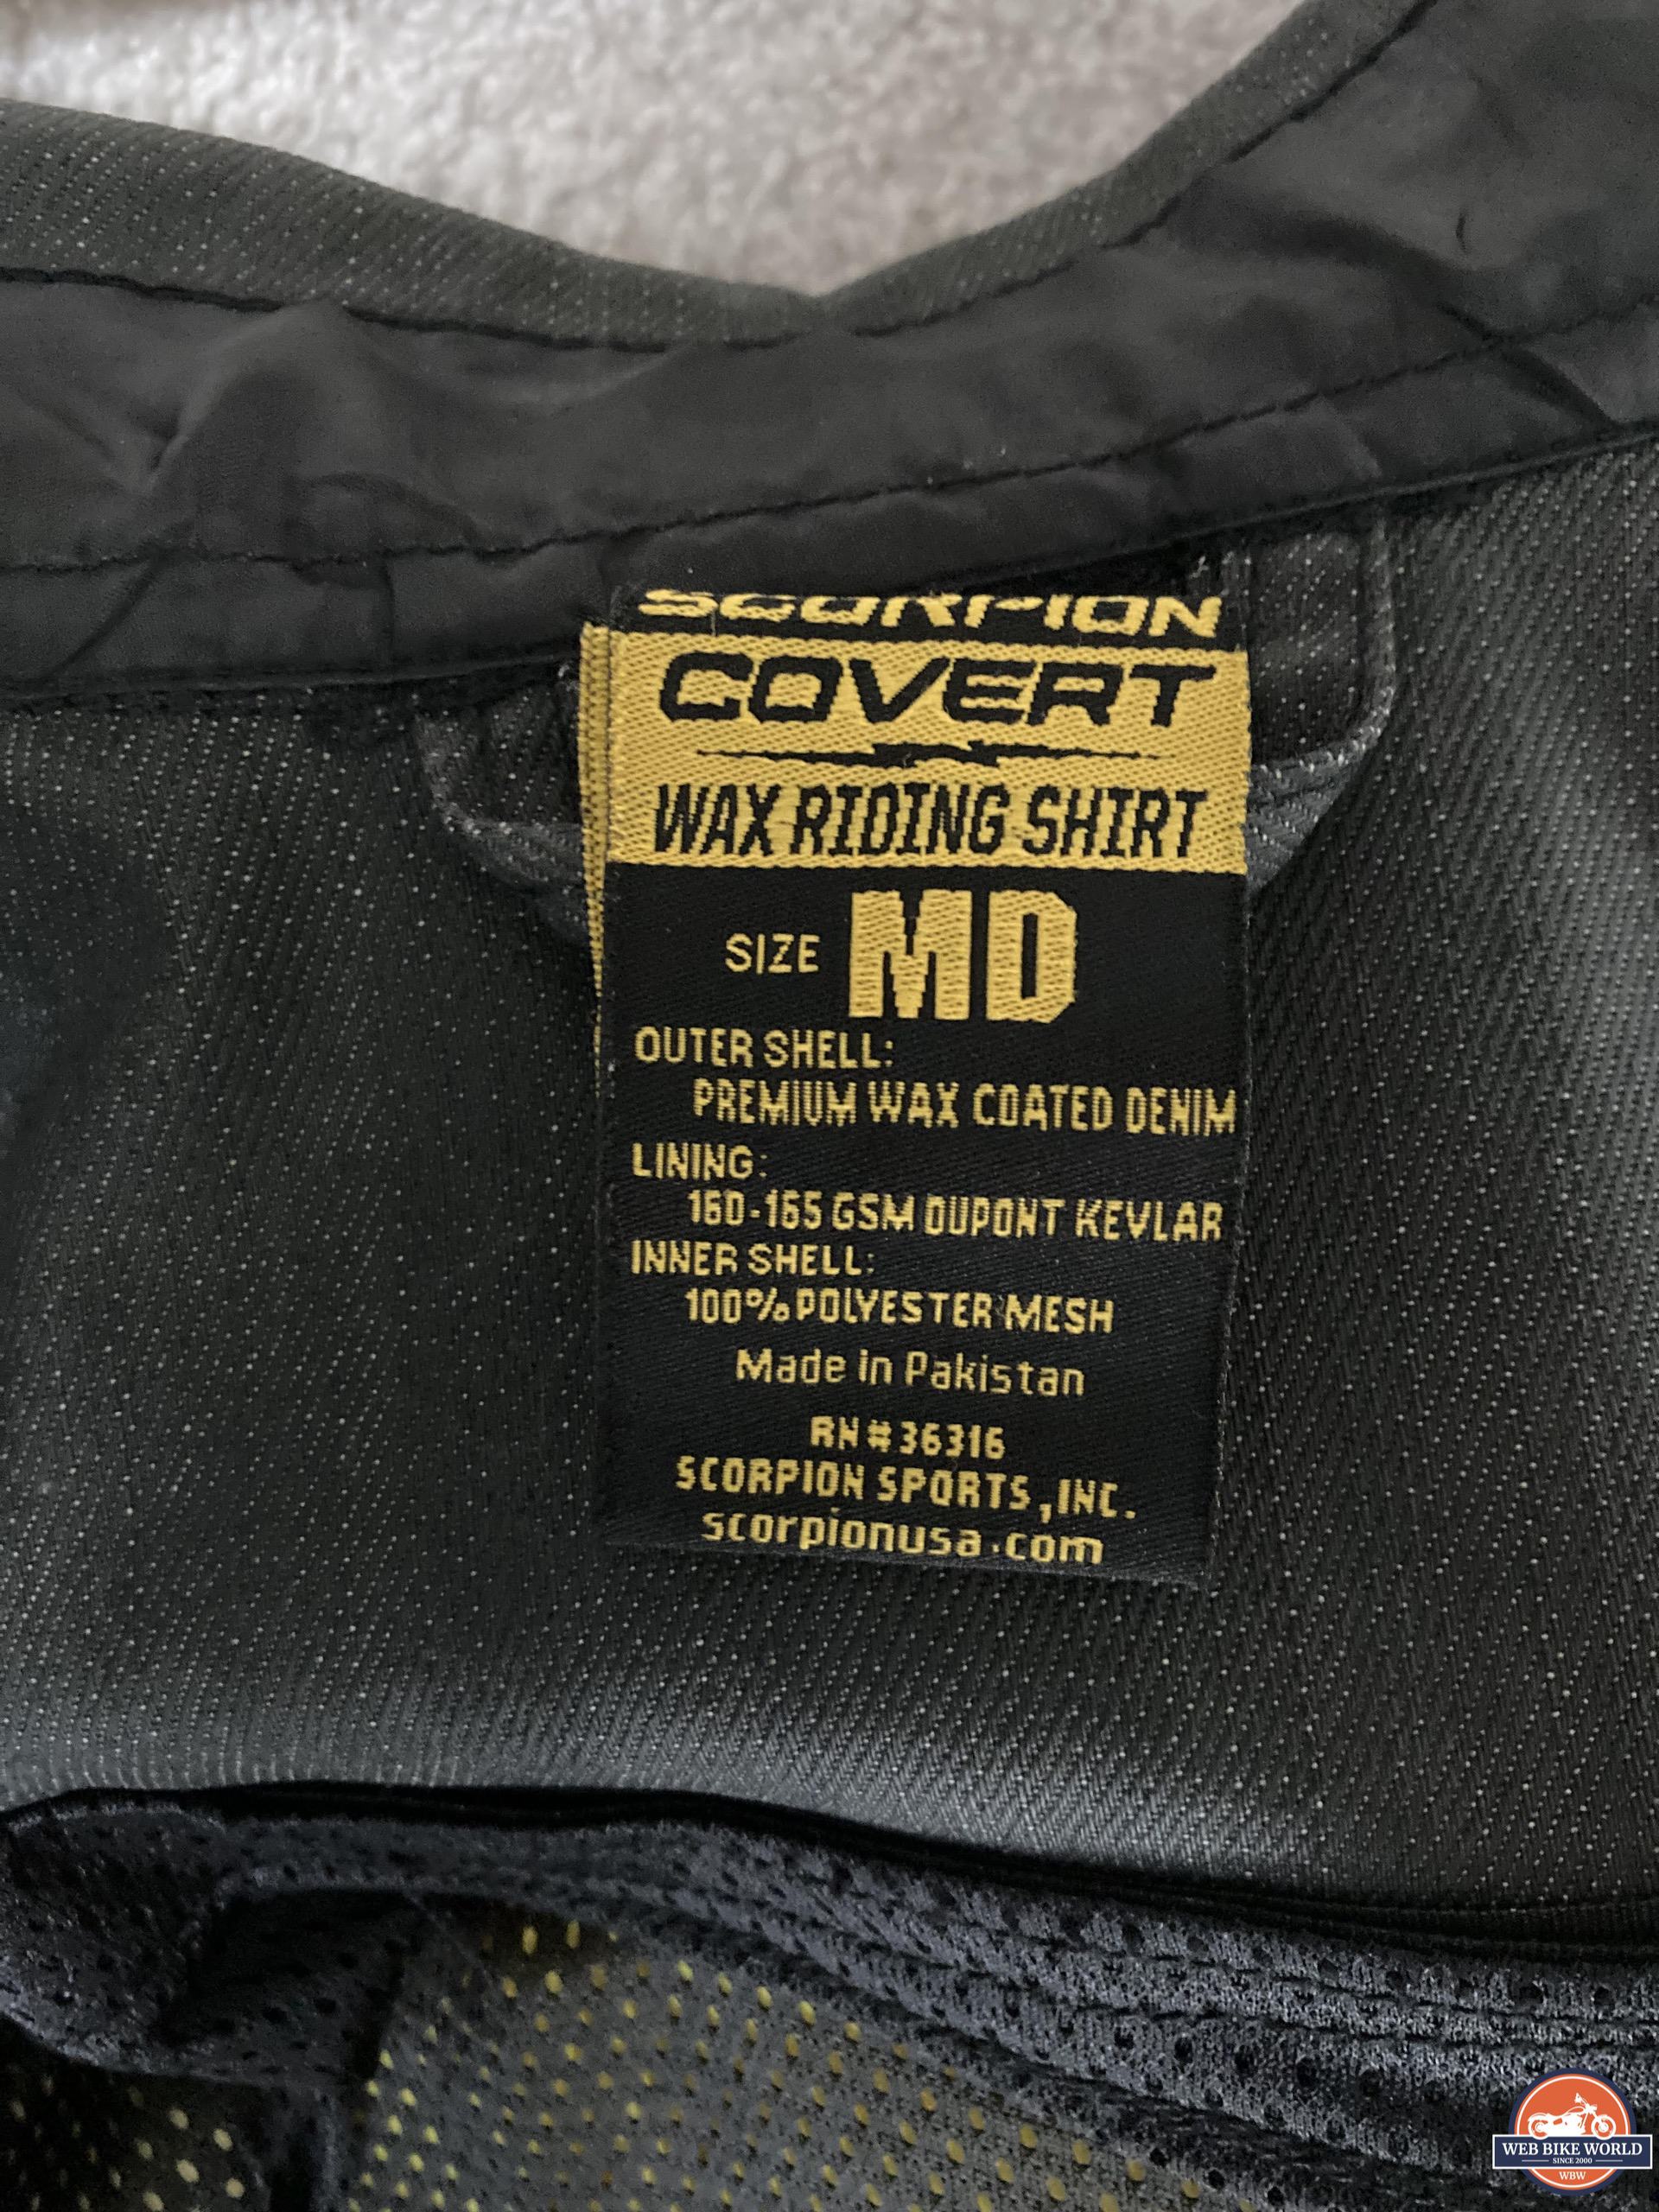 Scorpion EXO Covert Waxed Riding Shirt Real World Review